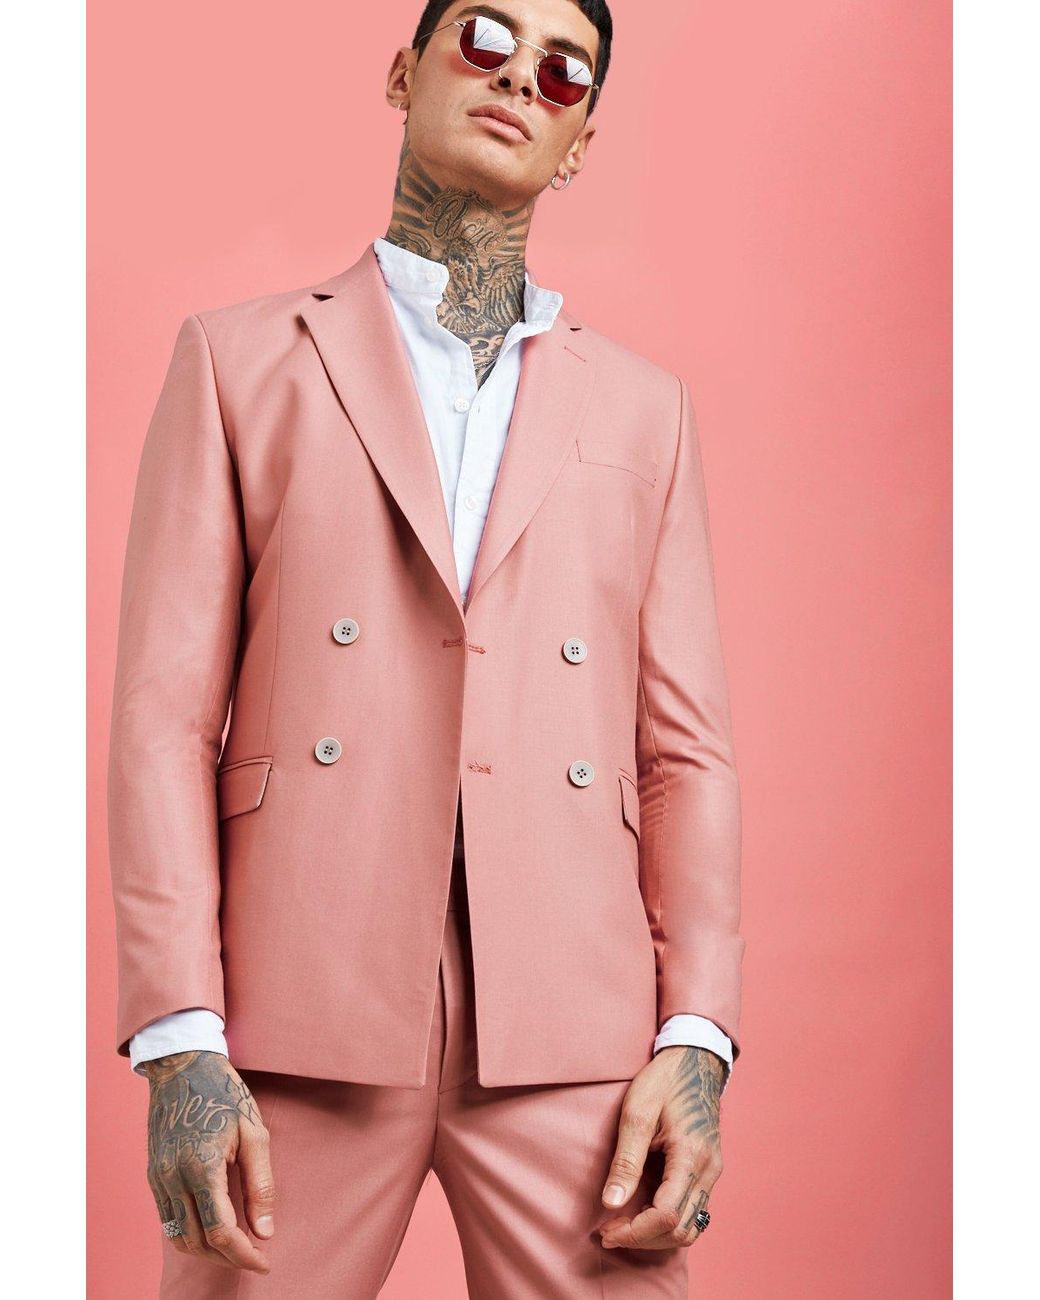 Boohoo Double Breasted Skinny Wrap Suit Jacket in Pink Womens Mens Clothing Mens Jackets Blazers 